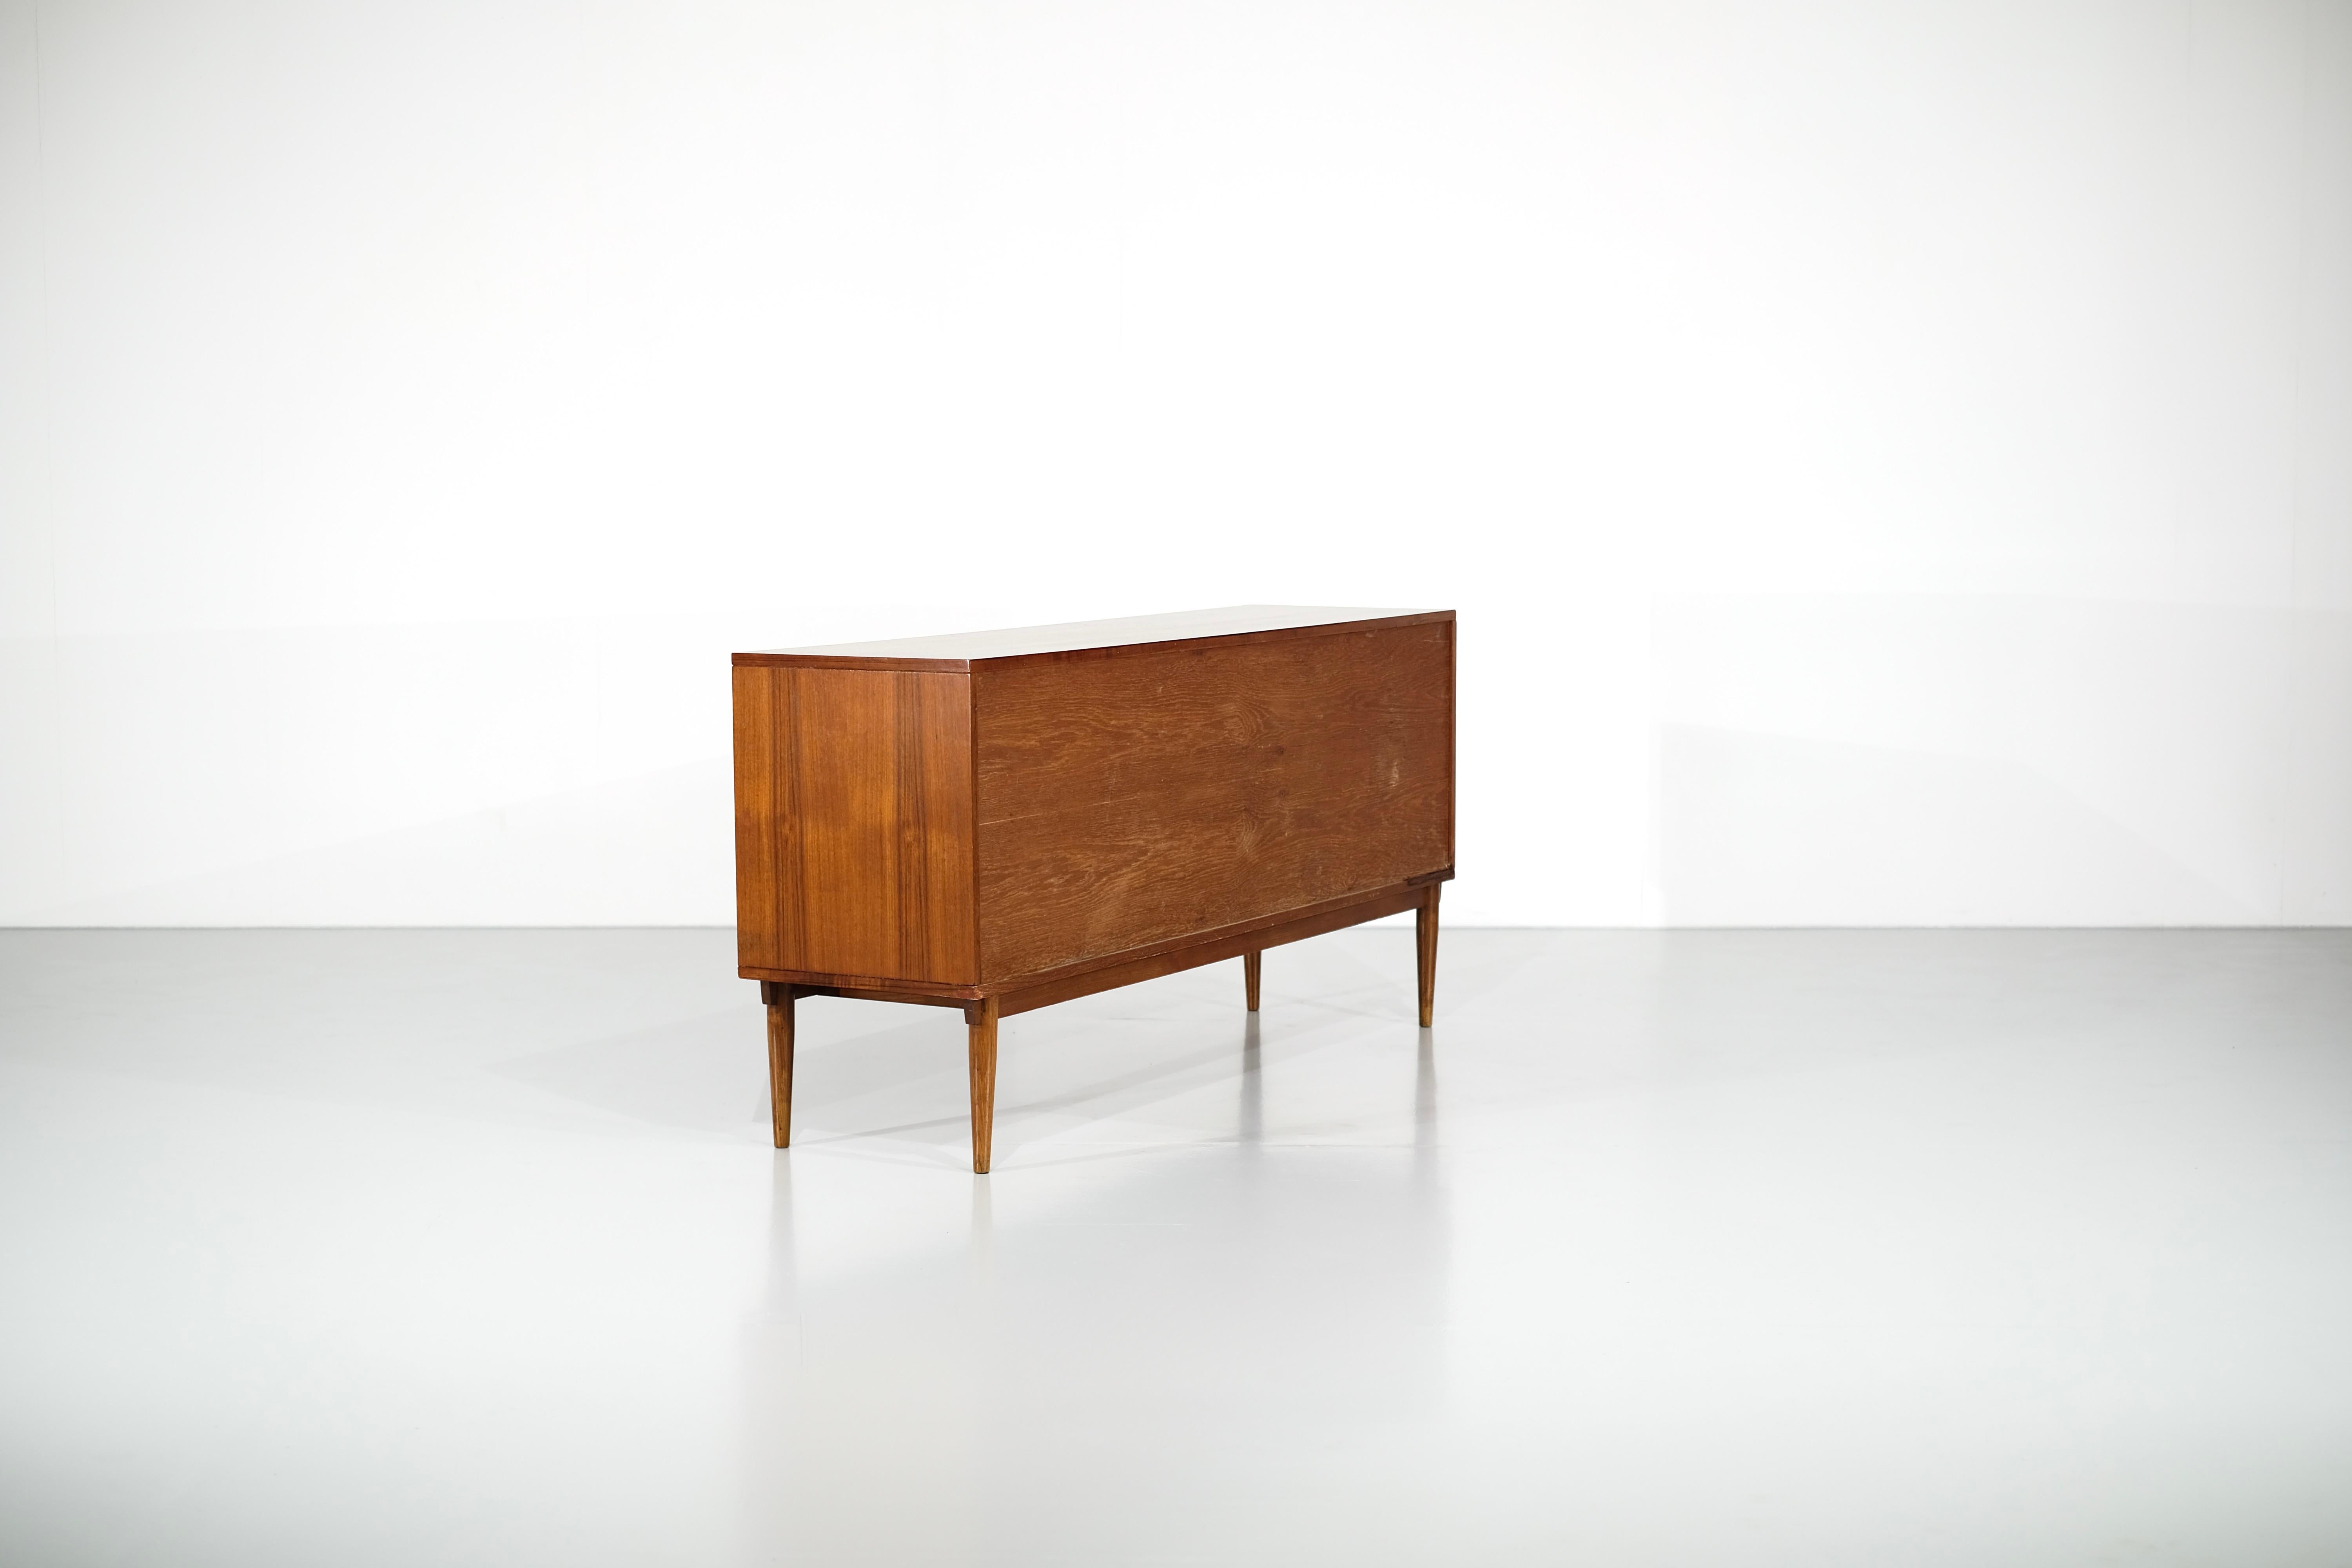  Sideboard in Wood medium size 1960's For Sale 6